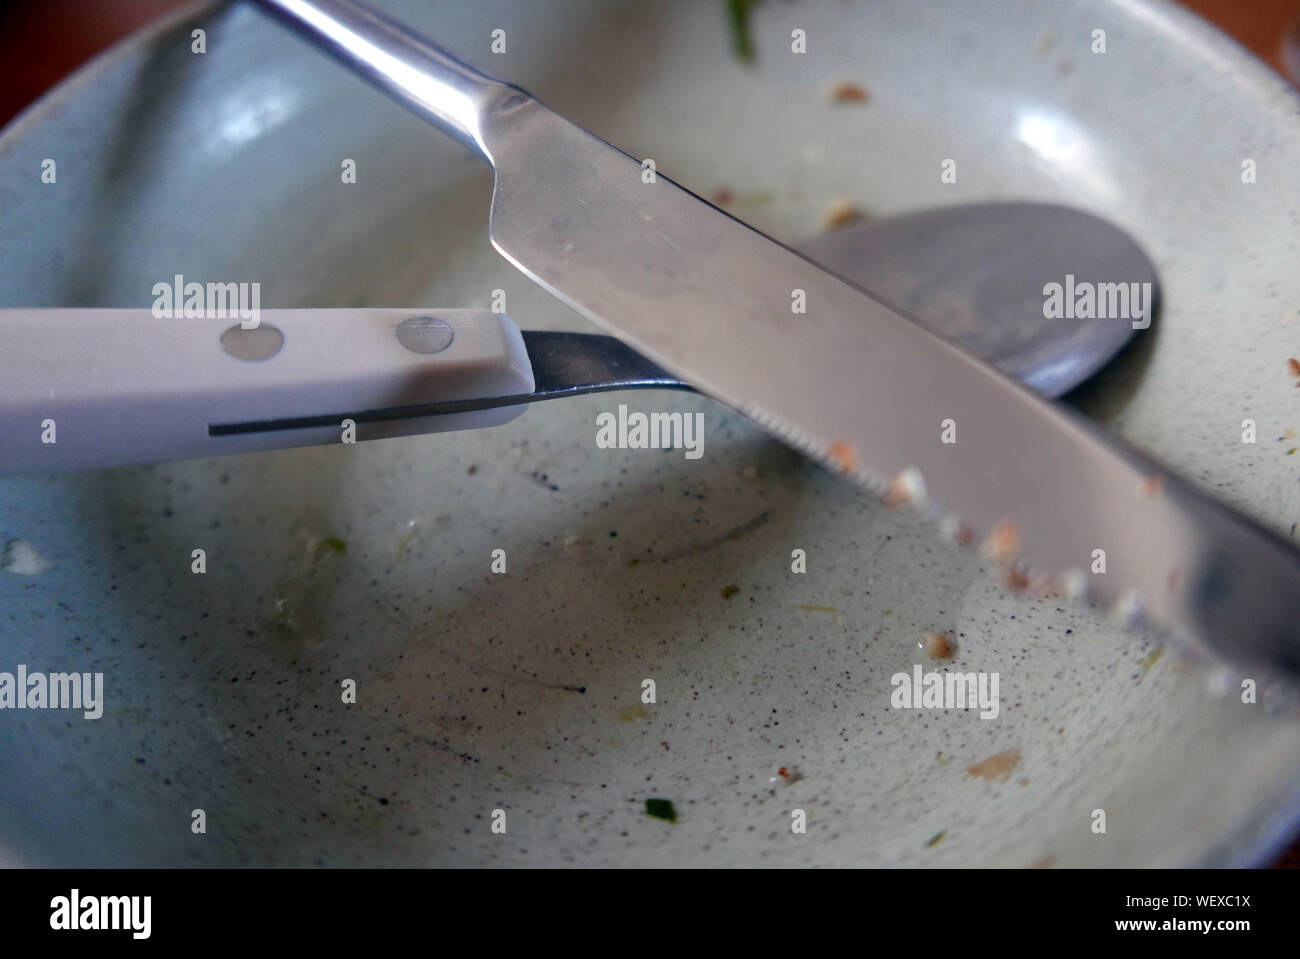 Close-up Of Silverware In Plate Stock Photo